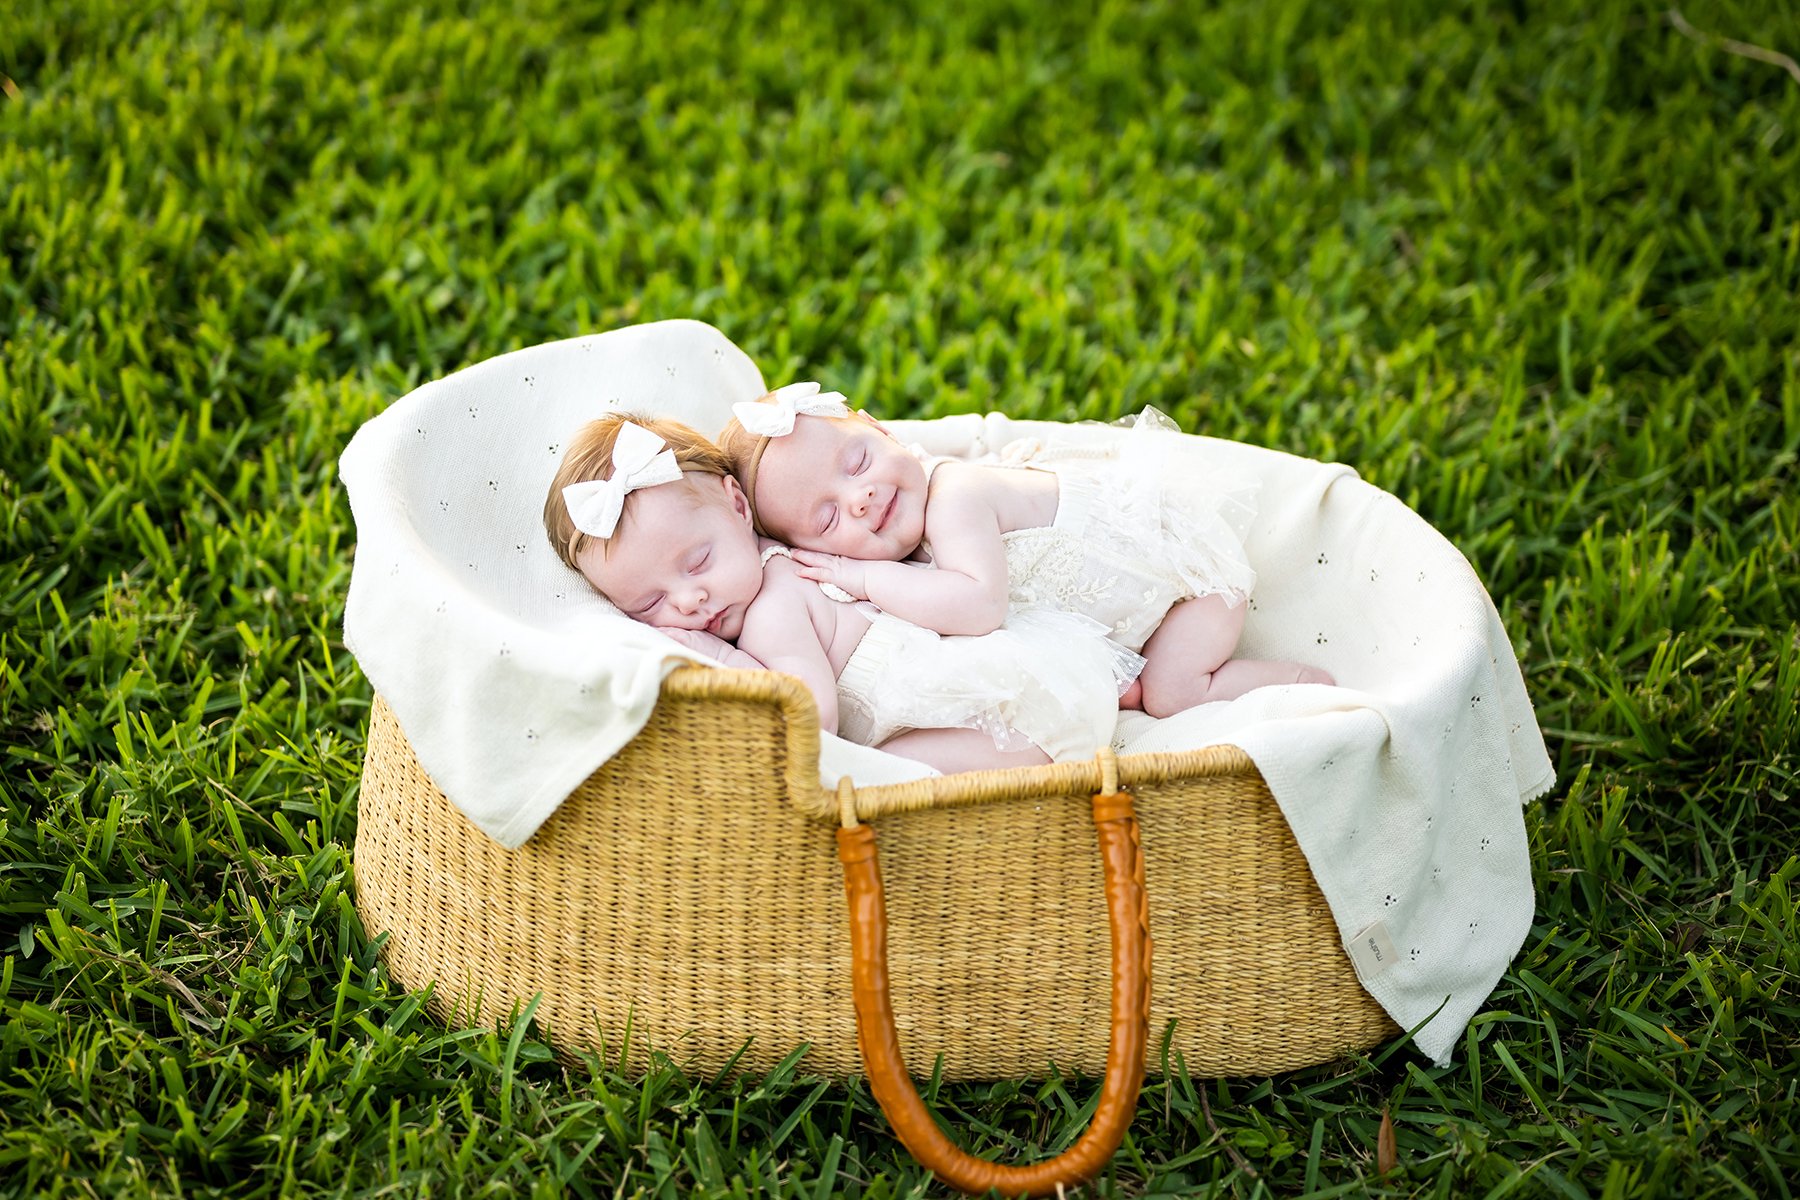  Outdoor newborn photography of twins 